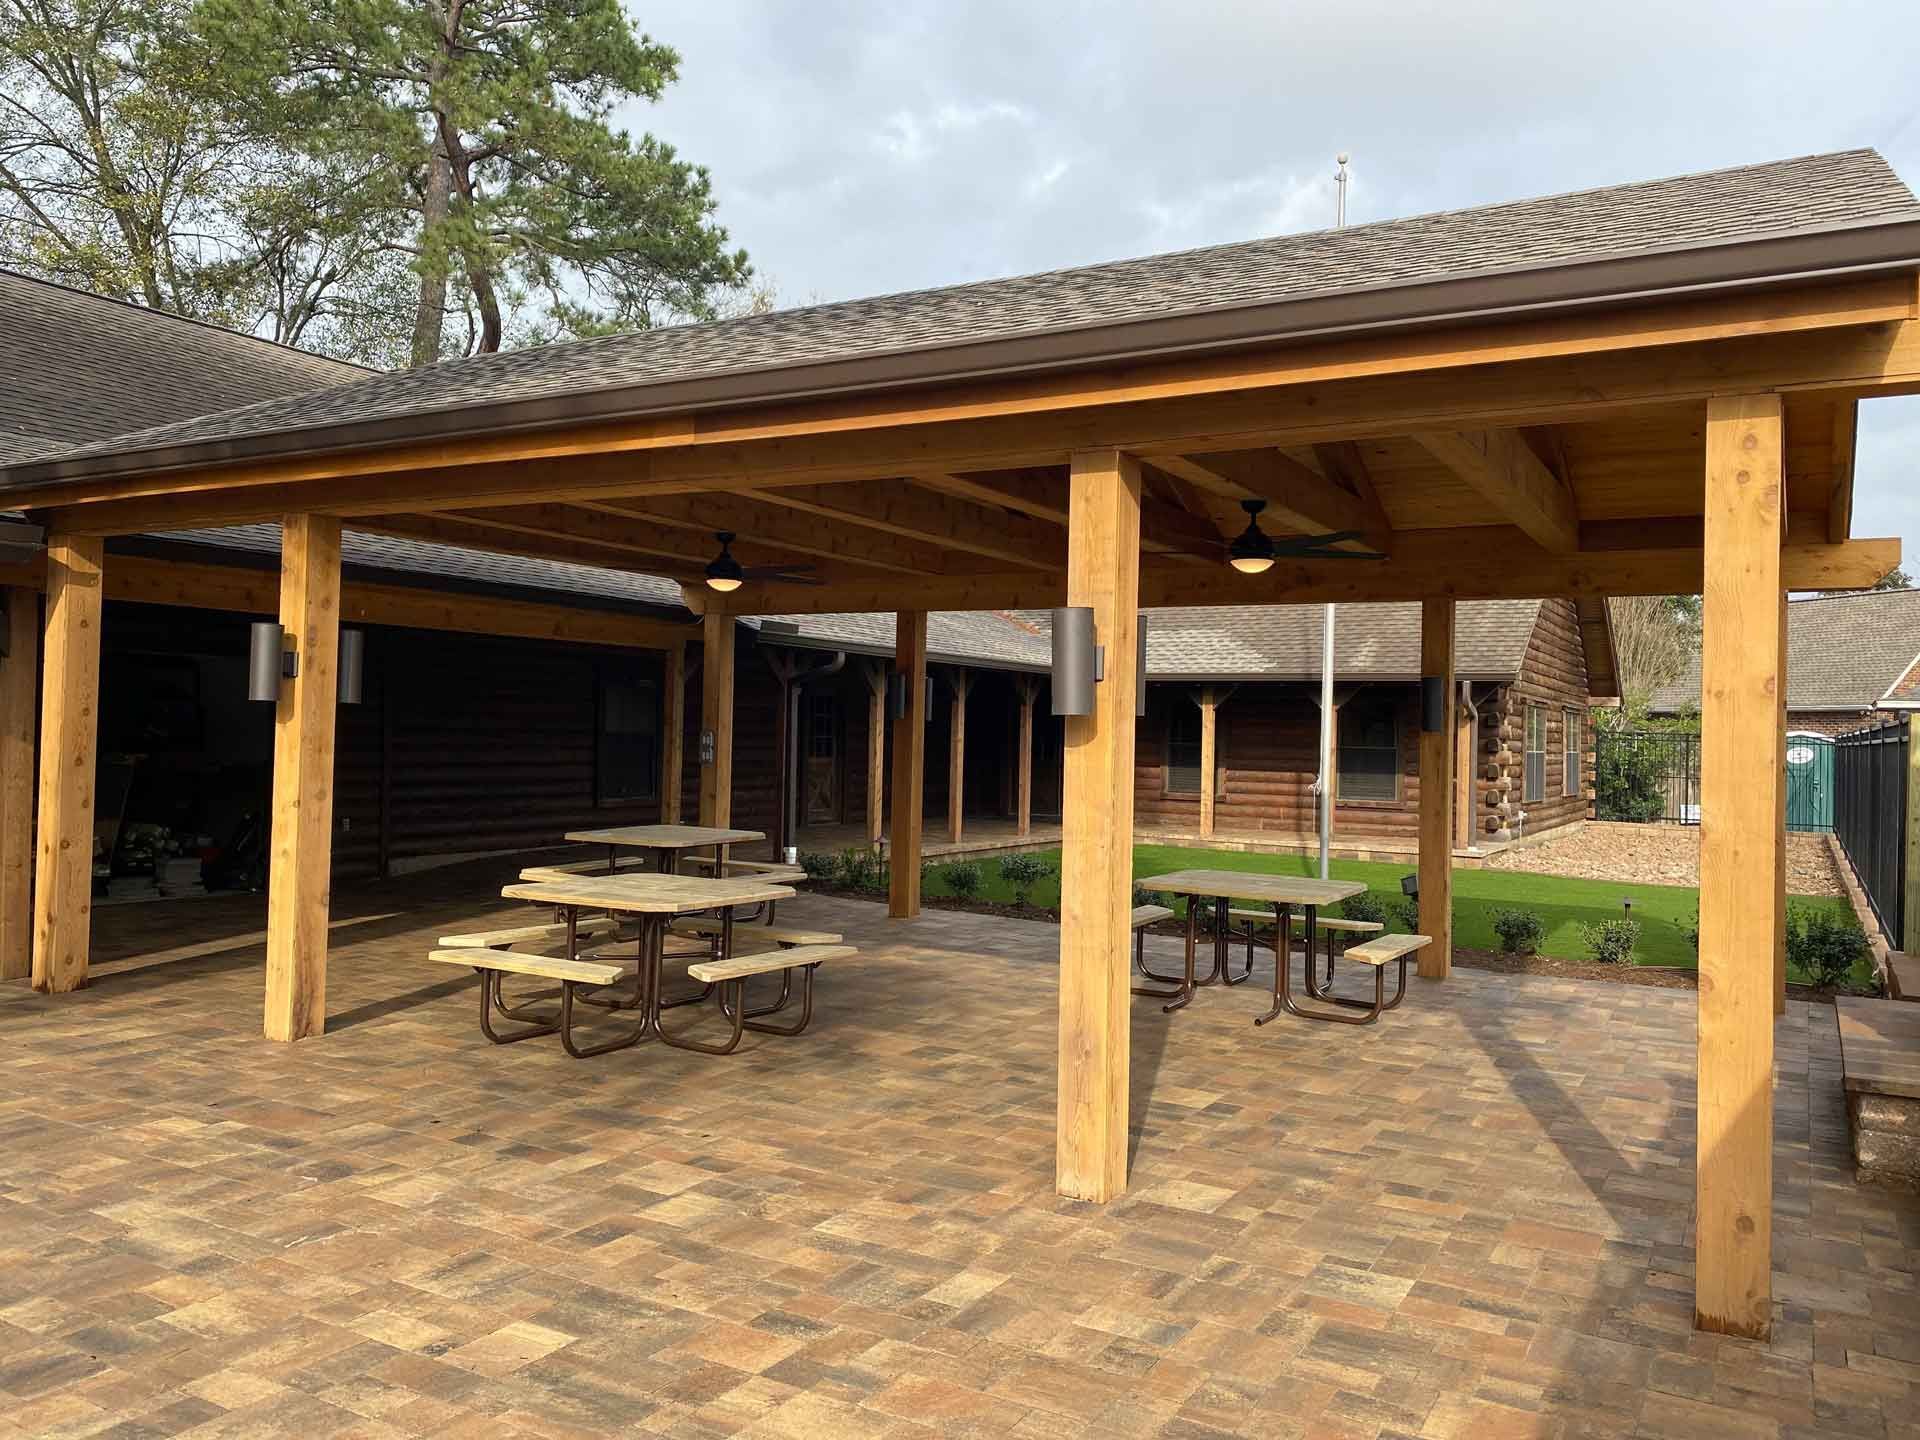 Large limestone patio covered with wood with camping tables